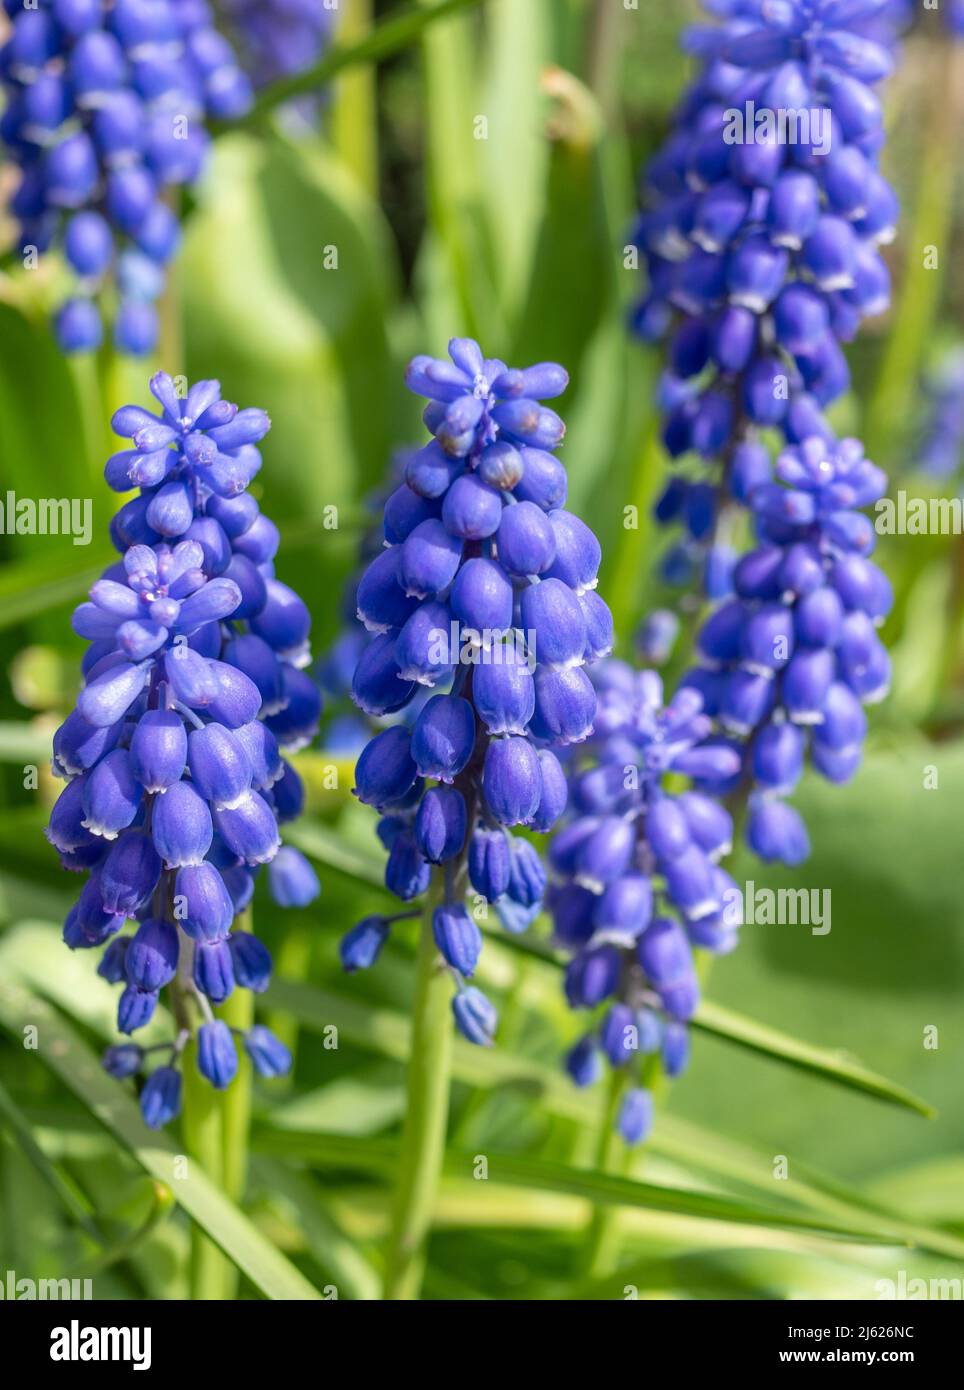 Grape hyacinth flowers in spring Stock Photo